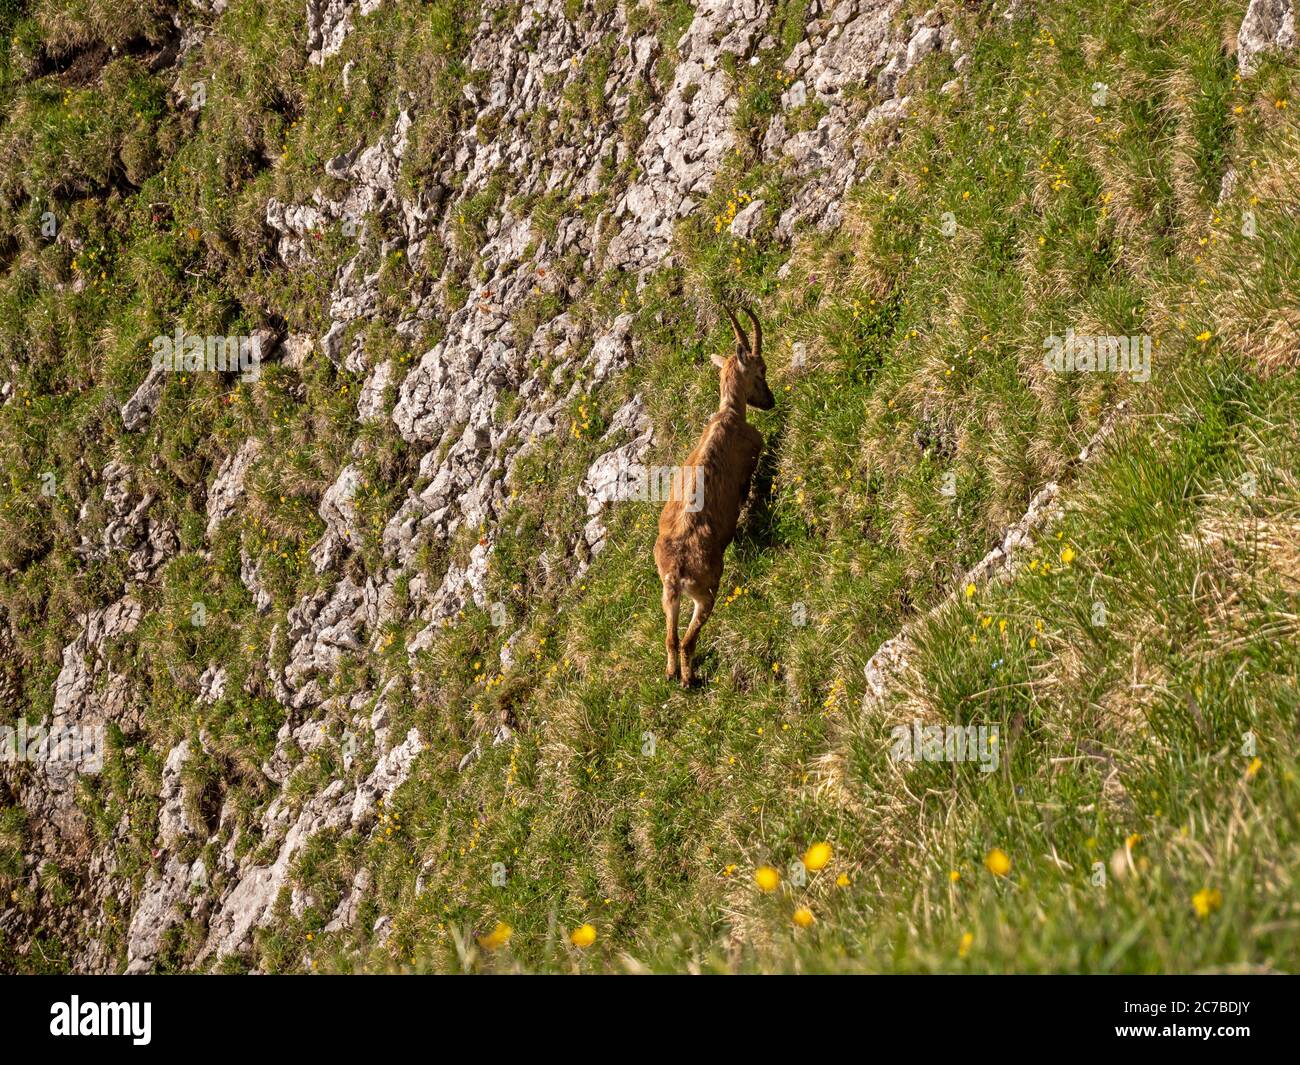 Shots of a wild ibex mountain goat gazing on grass on a cliff side in the high alps in the pilatus region of switzerland. Stock Photo